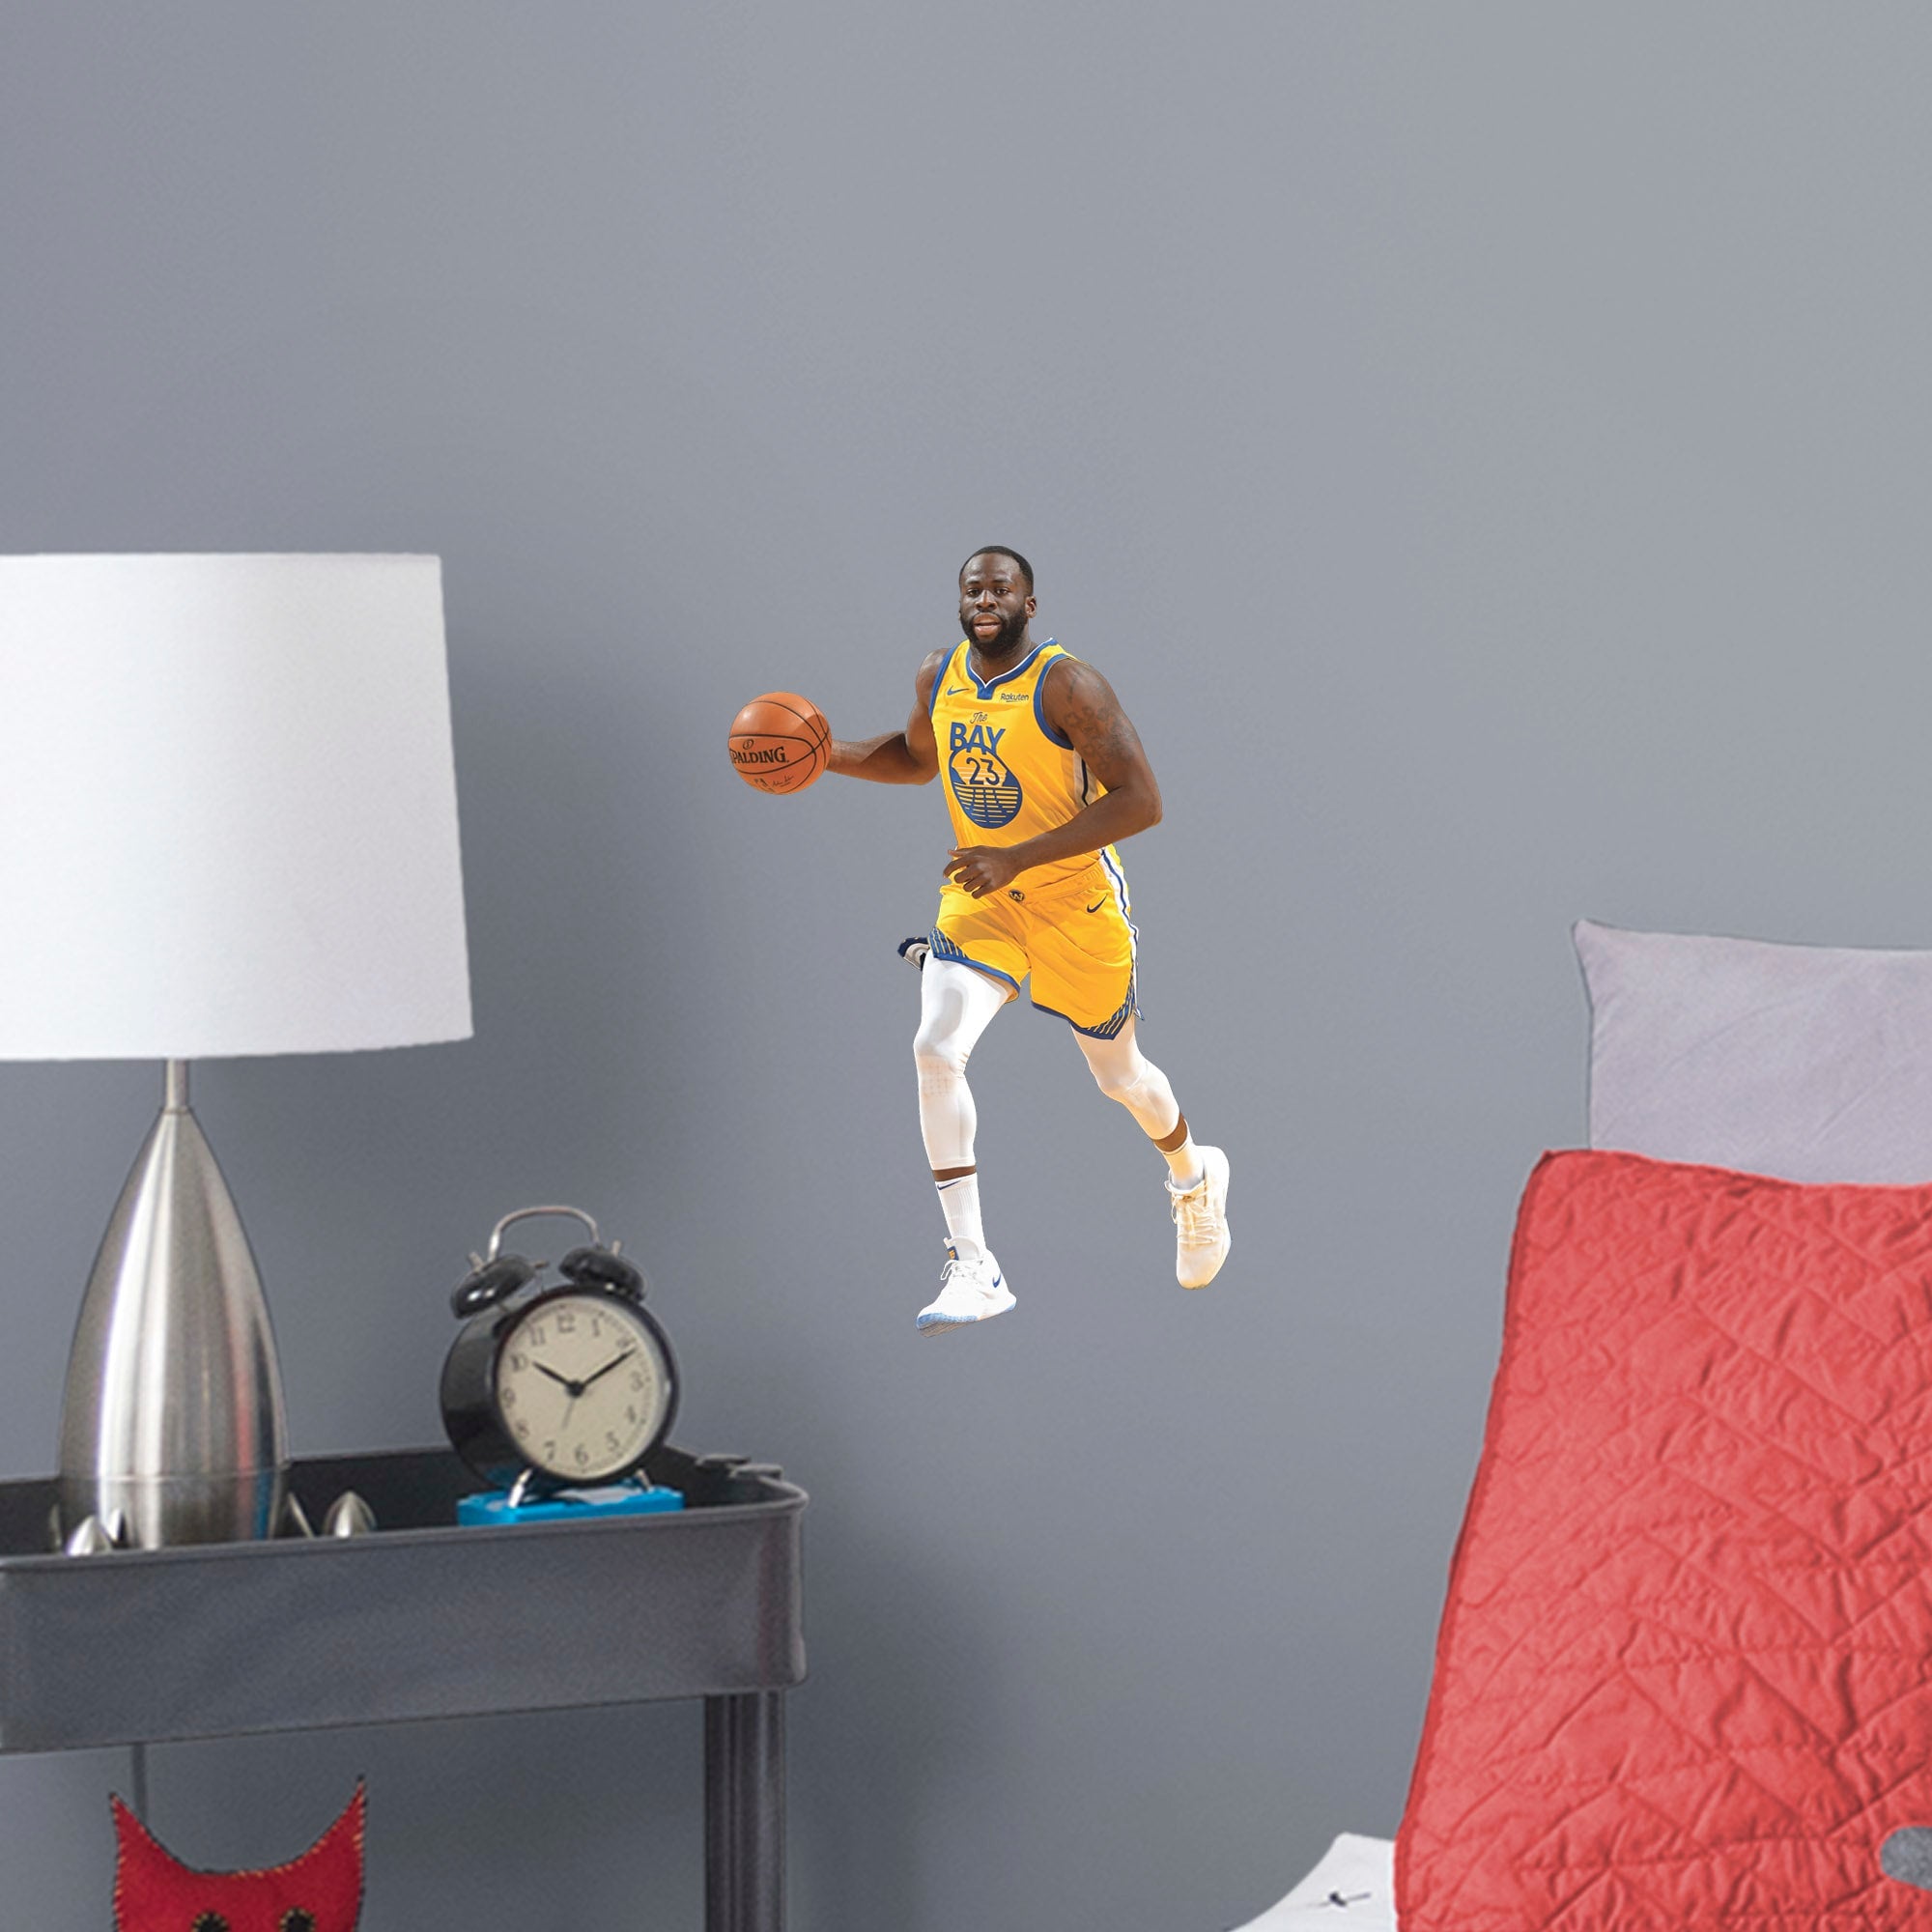 Draymond Green for Golden State Warriors - Officially Licensed NBA Removable Wall Decal Large by Fathead | Vinyl